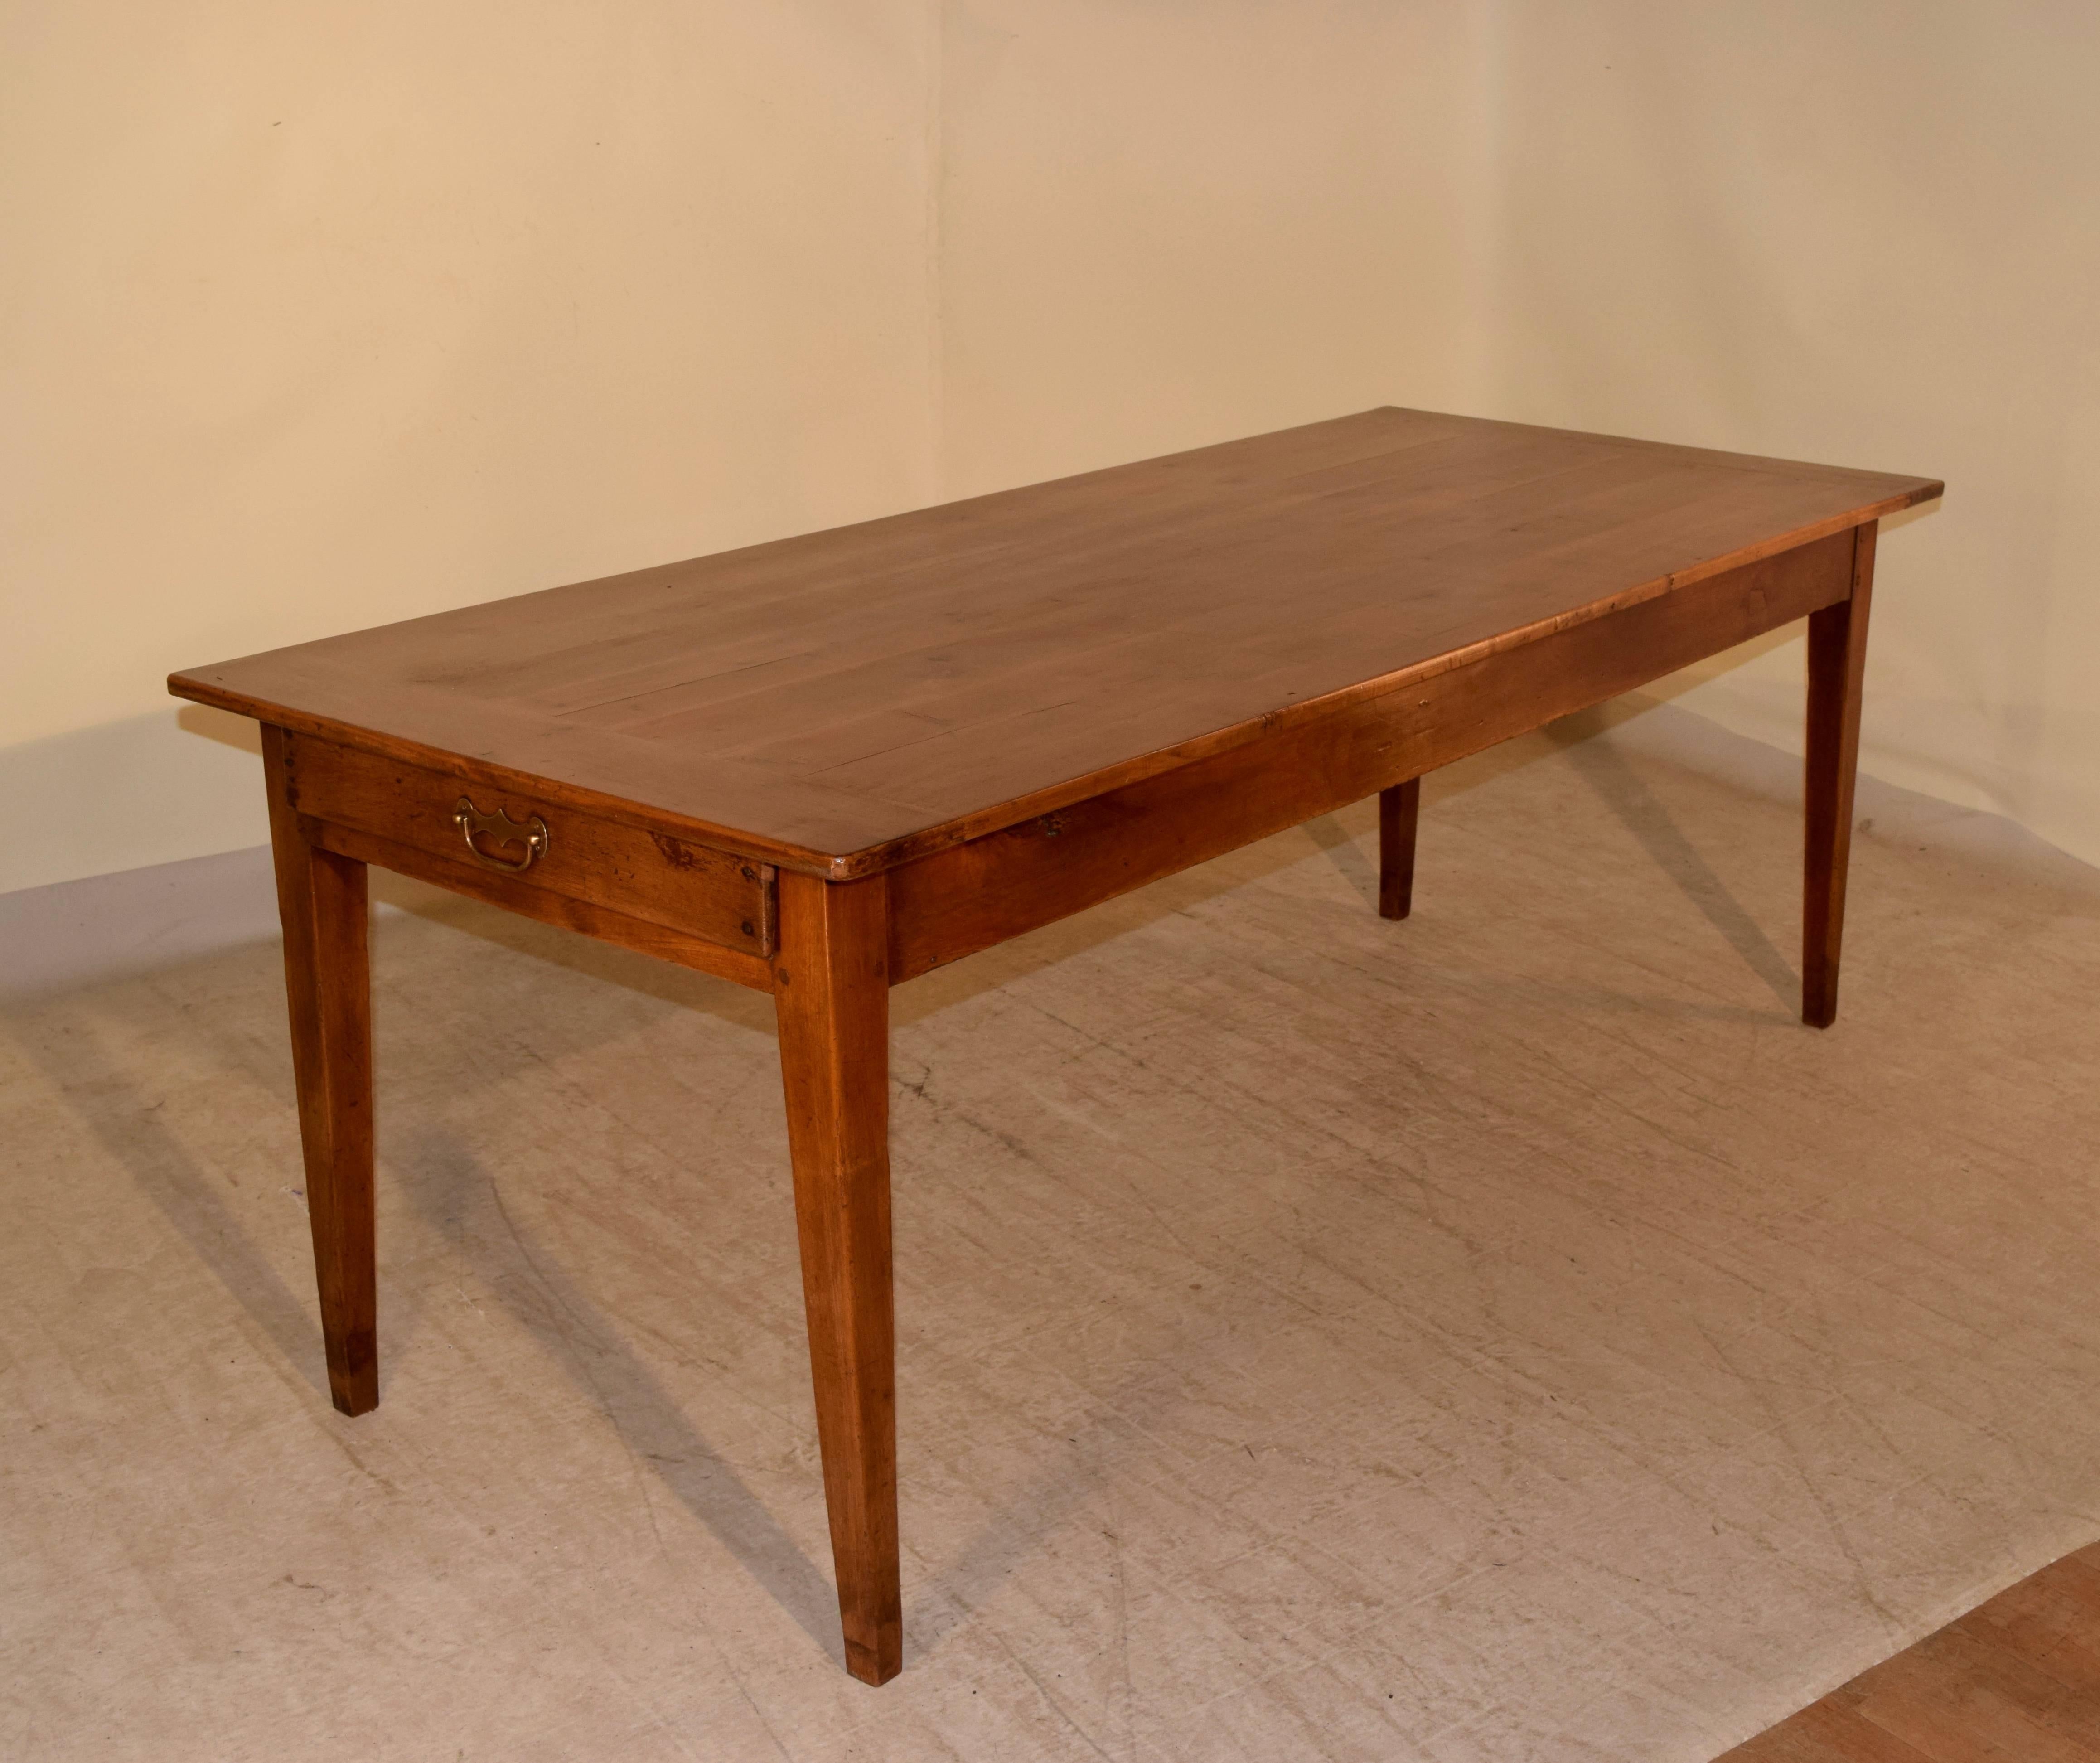 Rustic 19th Century French Cherry Farm Table